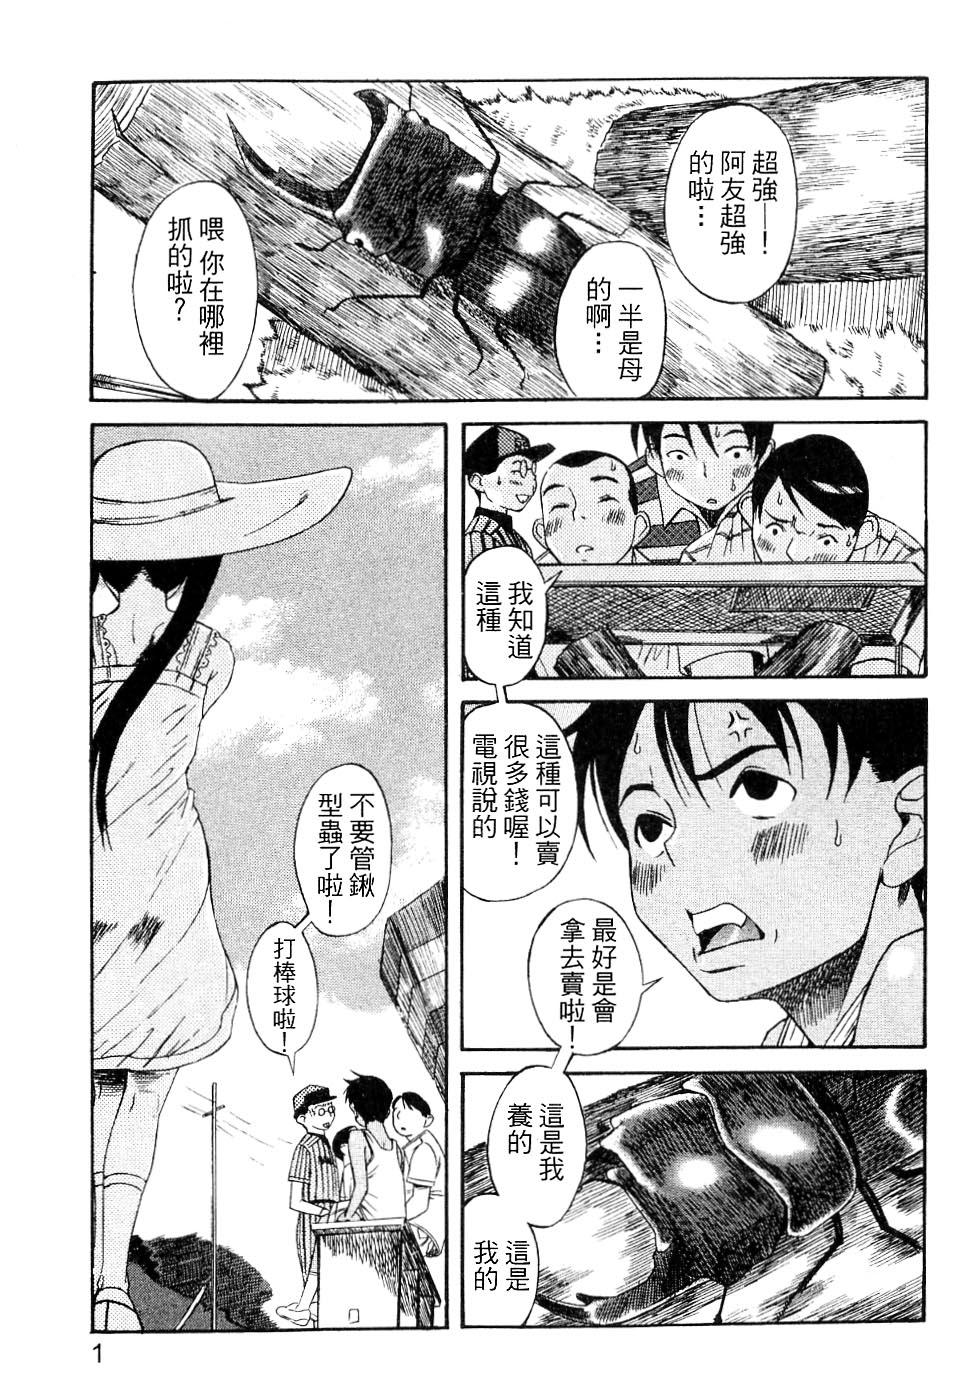 Interracial Hardcore Kuwagata - The Stag Beetle | 鍬形蟲 Straight - Page 2